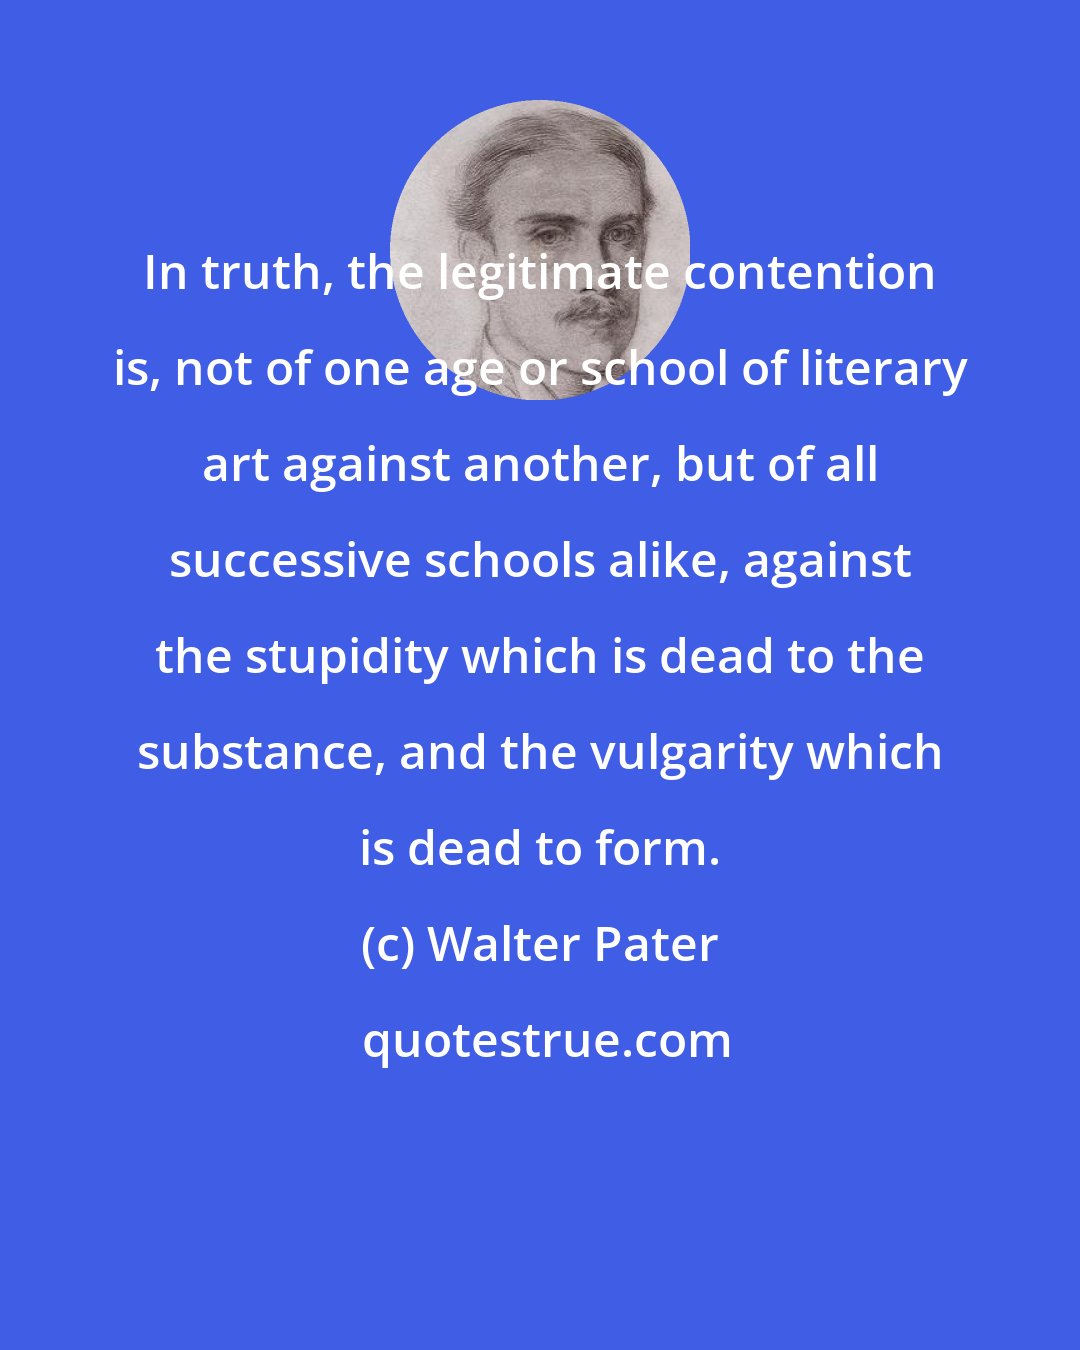 Walter Pater: In truth, the legitimate contention is, not of one age or school of literary art against another, but of all successive schools alike, against the stupidity which is dead to the substance, and the vulgarity which is dead to form.